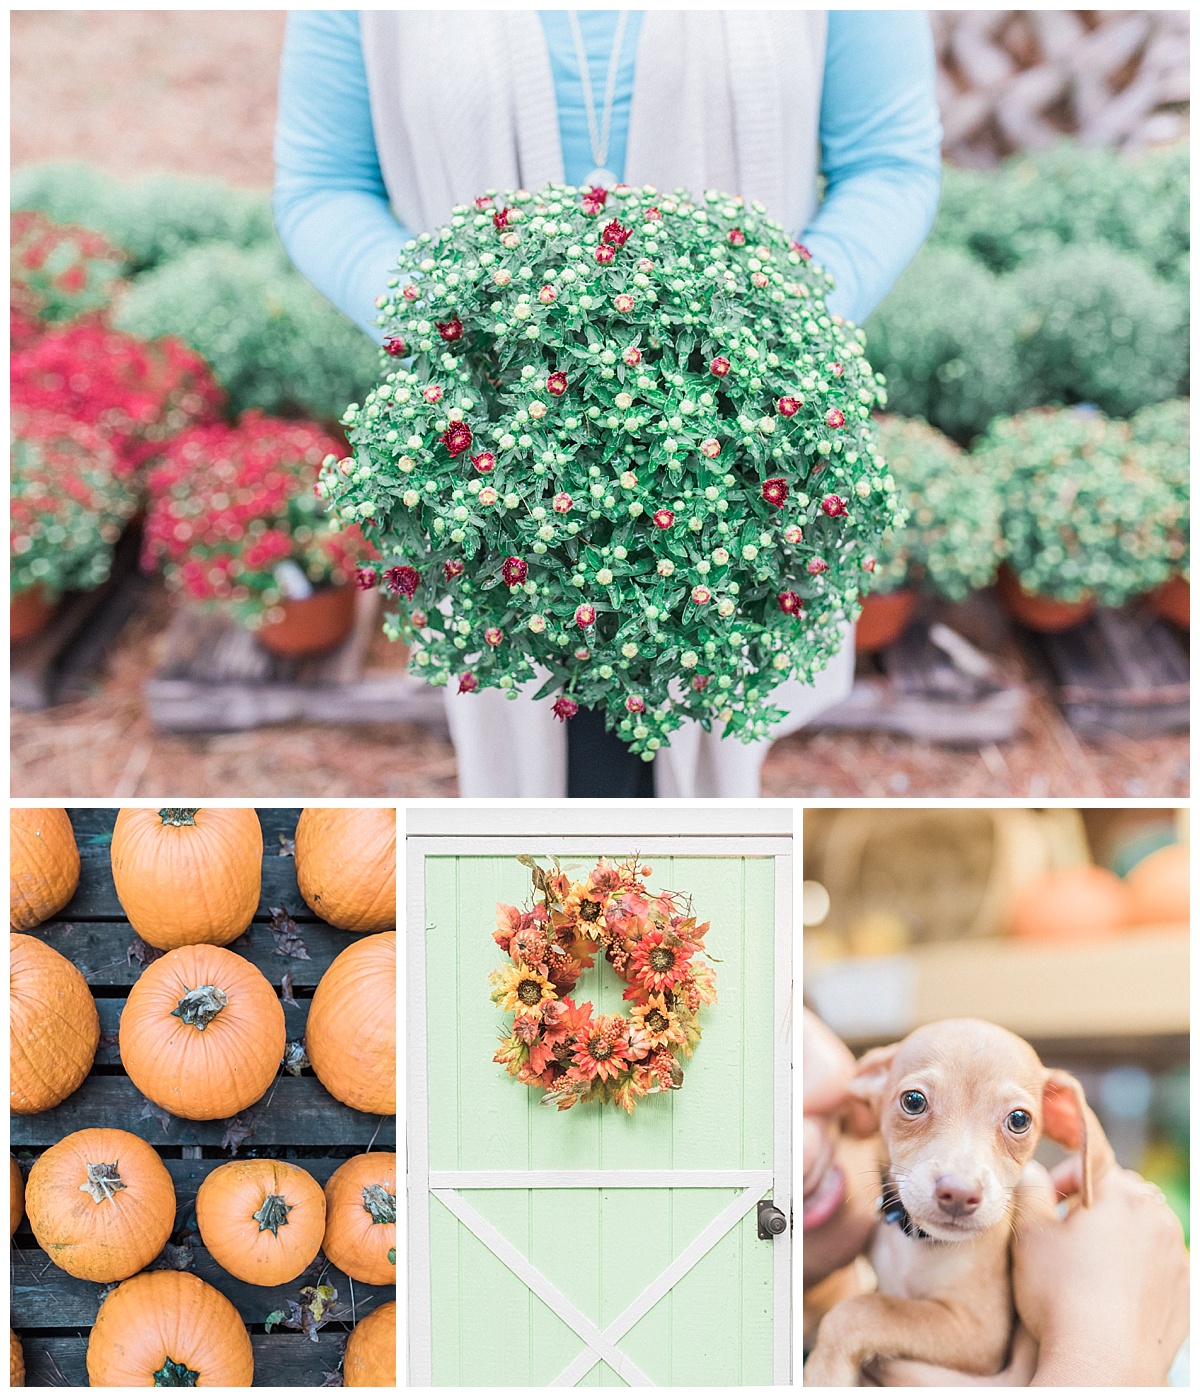 Durham, Raleigh, Chapel Hill engagement, wedding, lifestyle photographer | Radian Photography | Perkins Orchard | Durham, North Carolina Lifestyle Photography | http://radianphotography.com